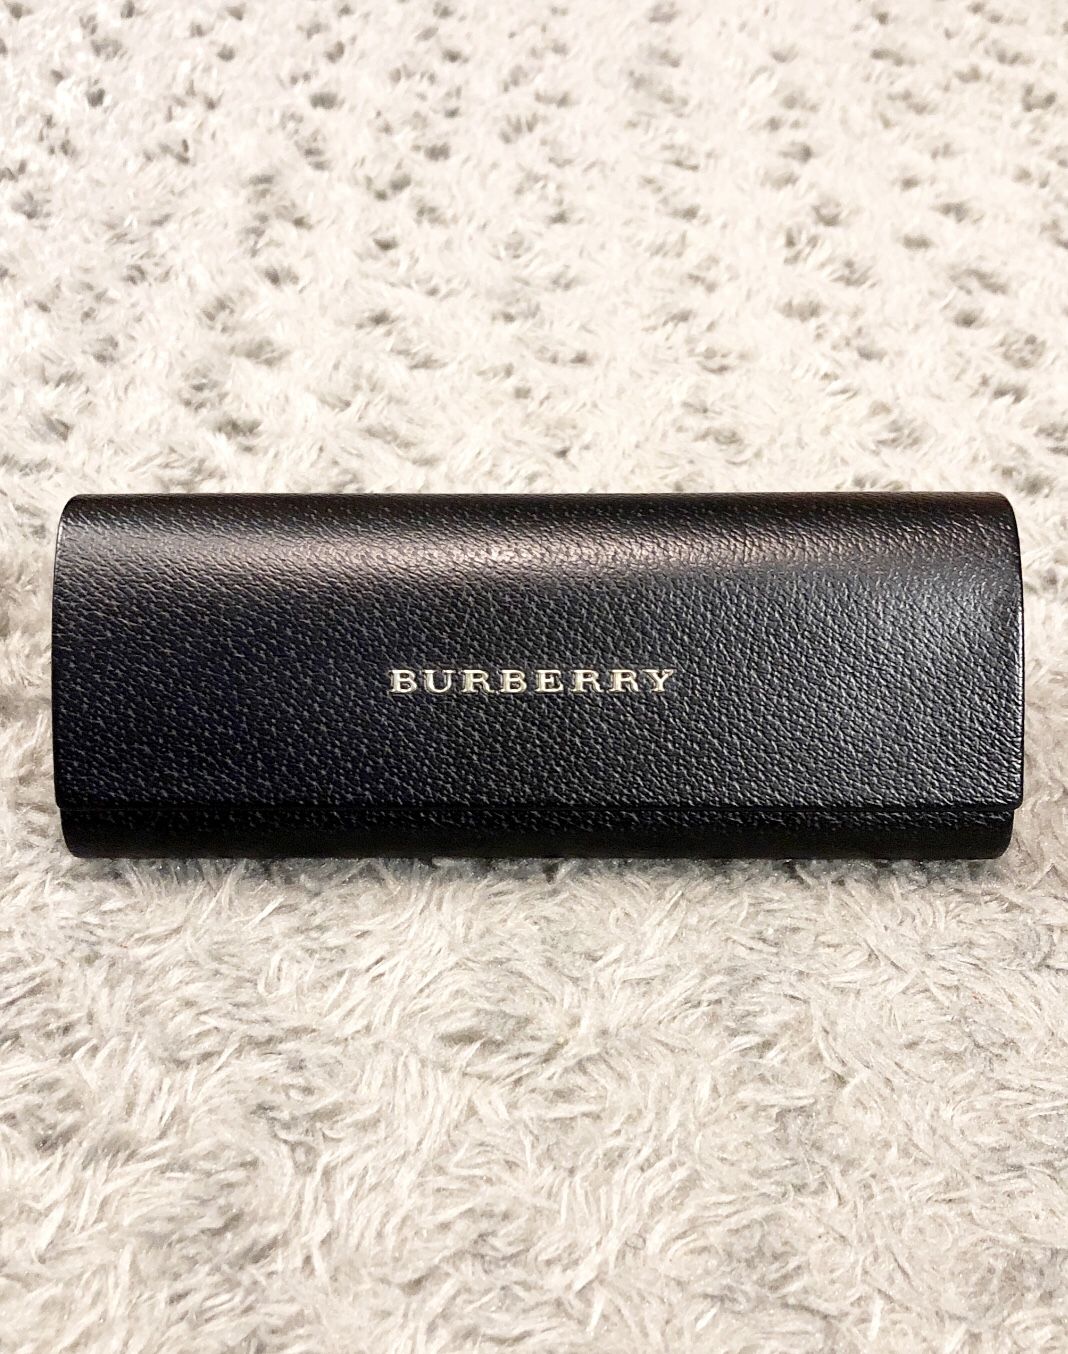 Burberry eyeglasses case Black leather gold logo brand new! Perfect for your replacement case or main case!